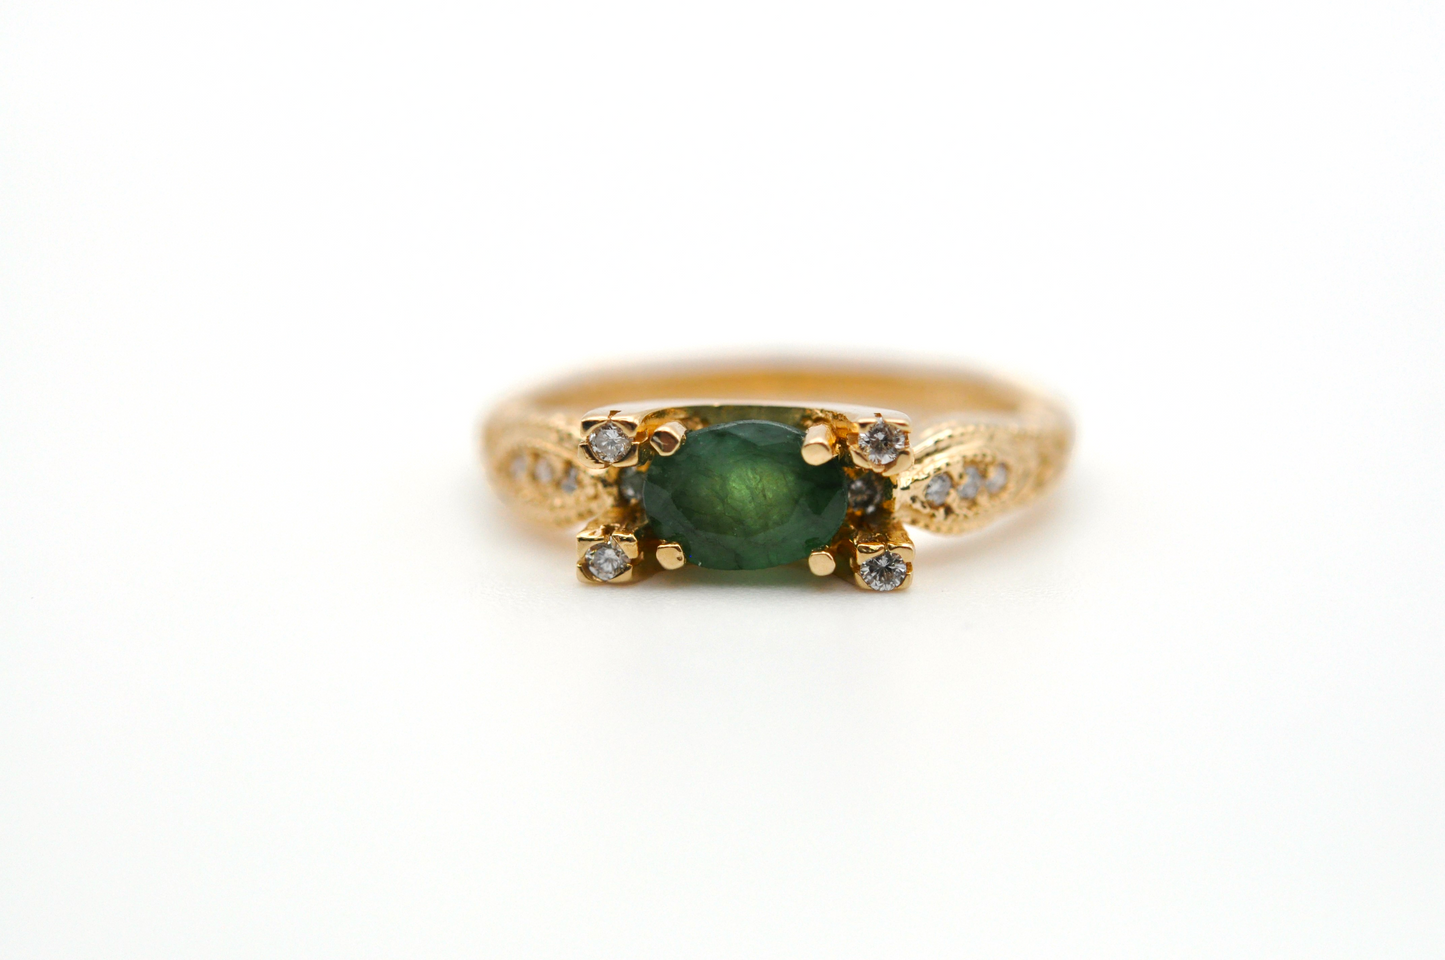 Unique Yellow Gold Vintage Oval Emerald Ring with Diamond Accents